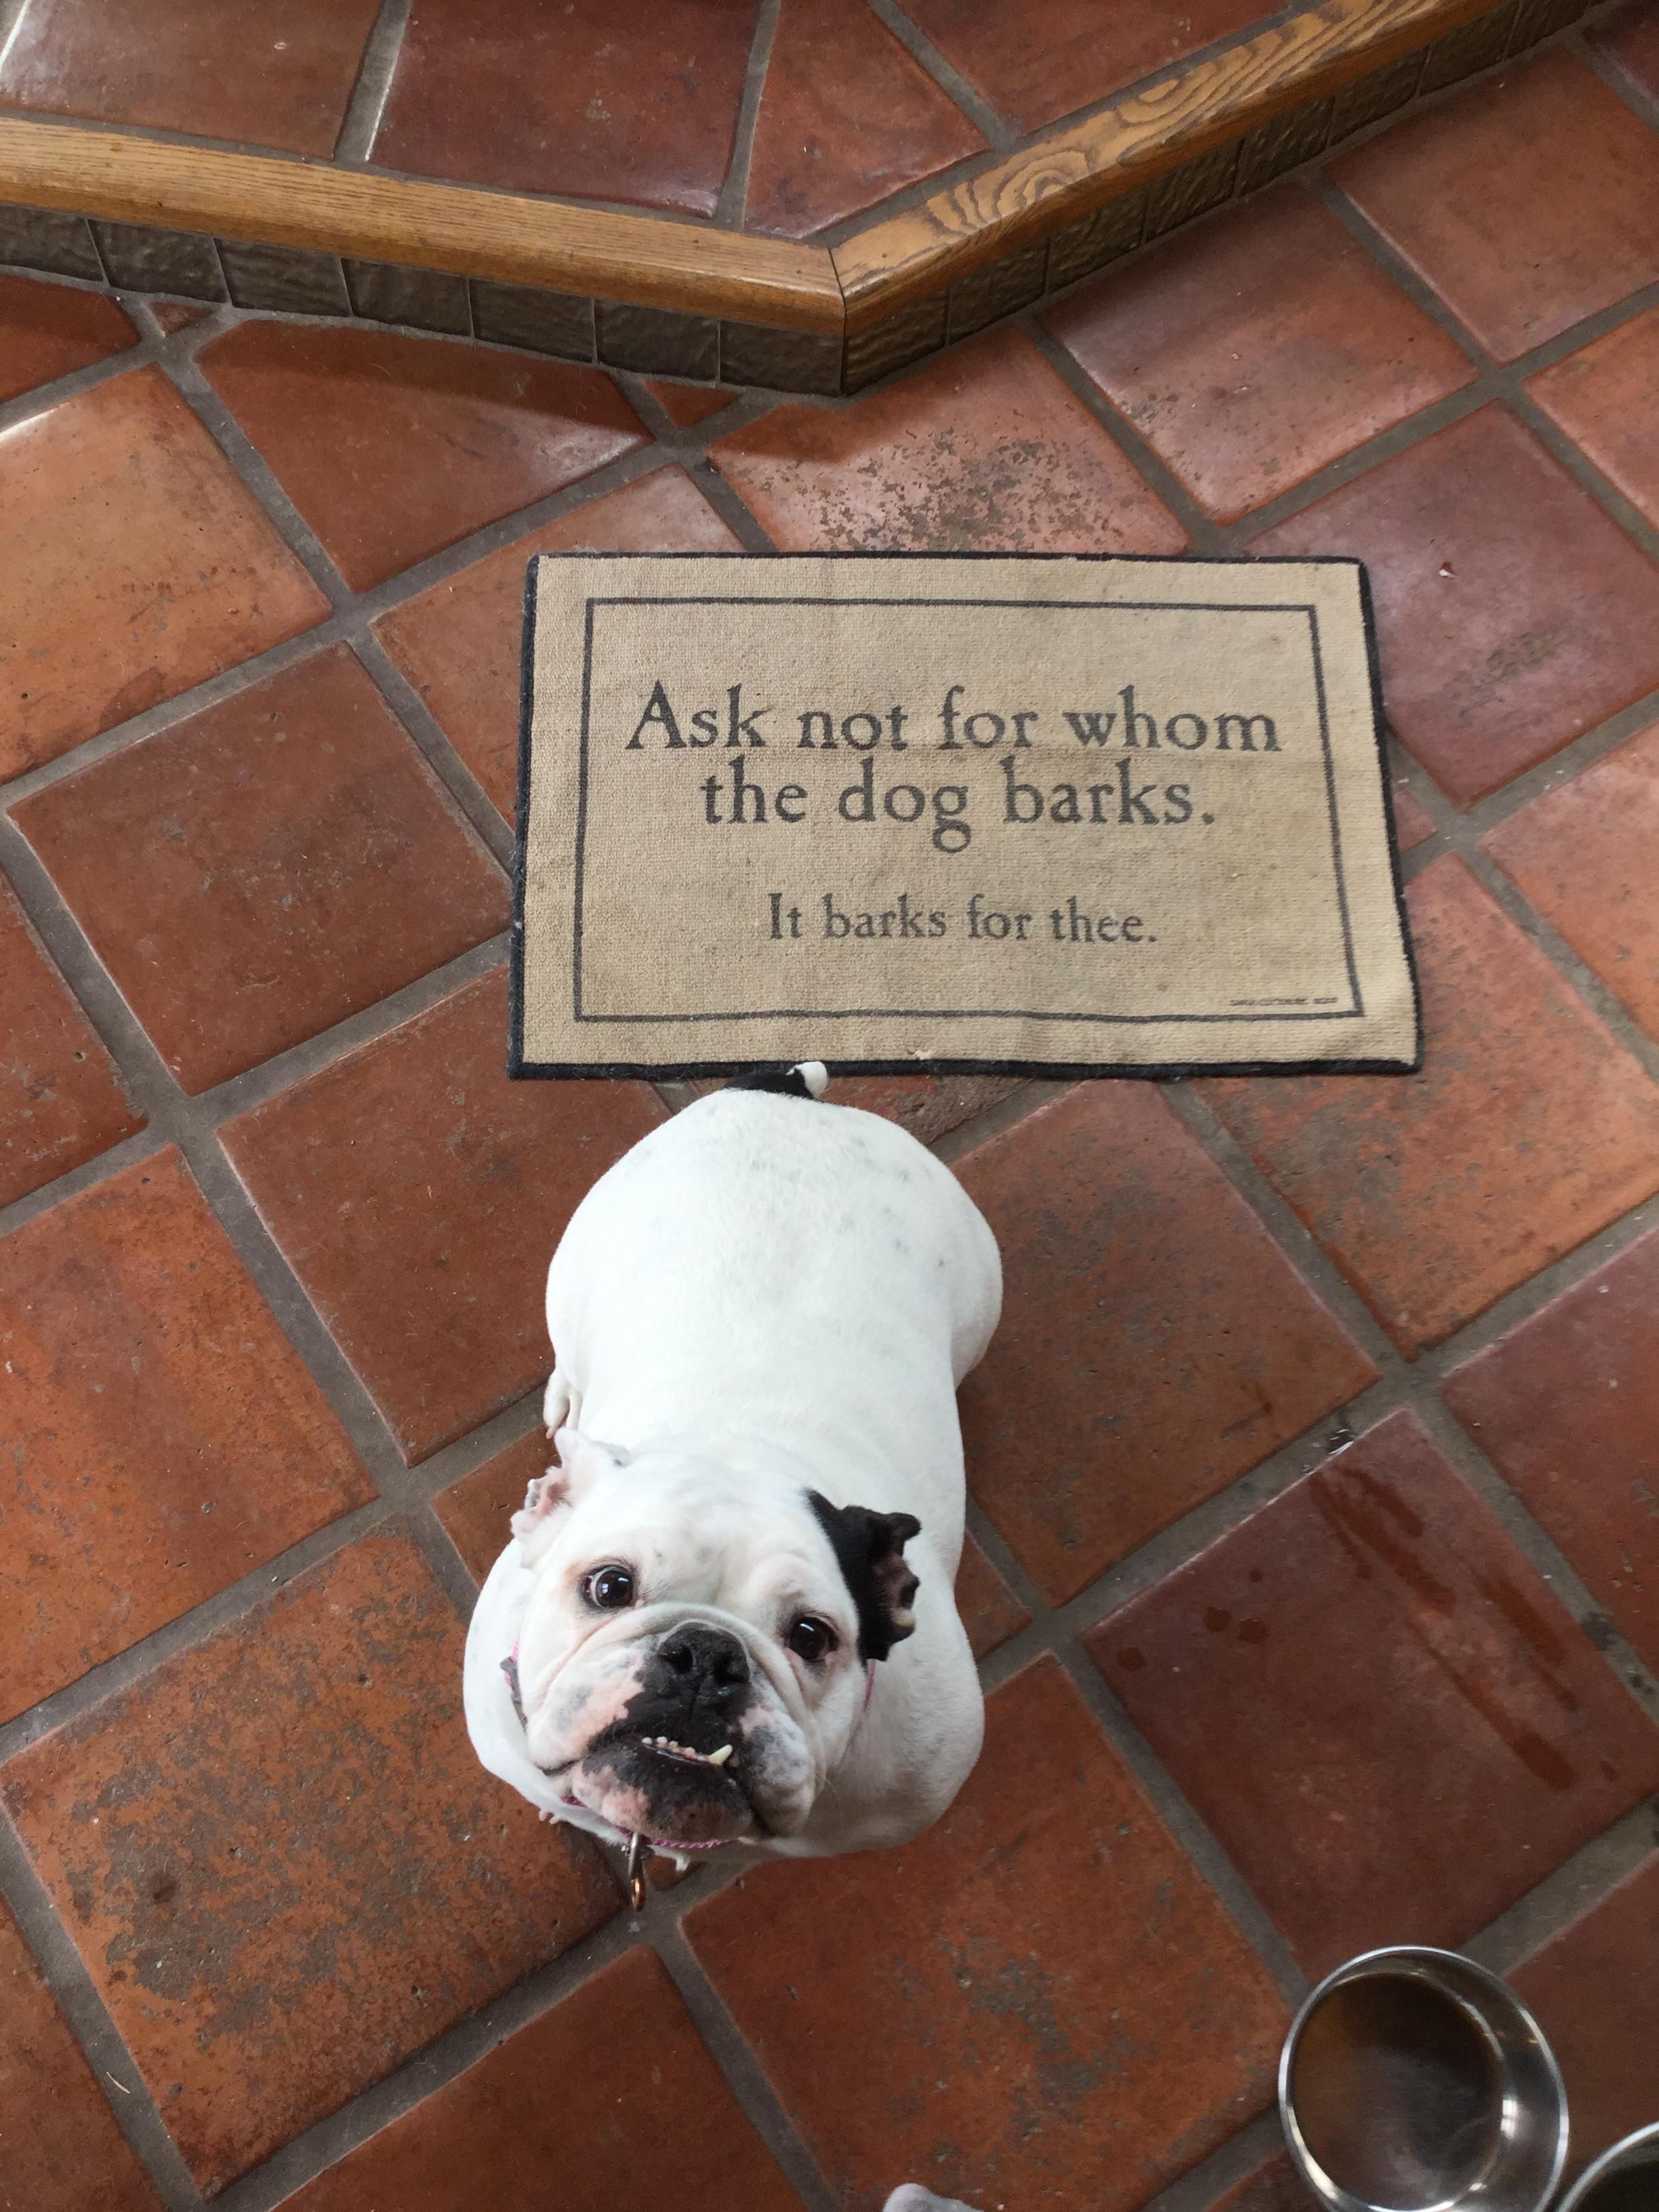 I bought that same mat for my mom for xmas. I raise you one English bulldog!